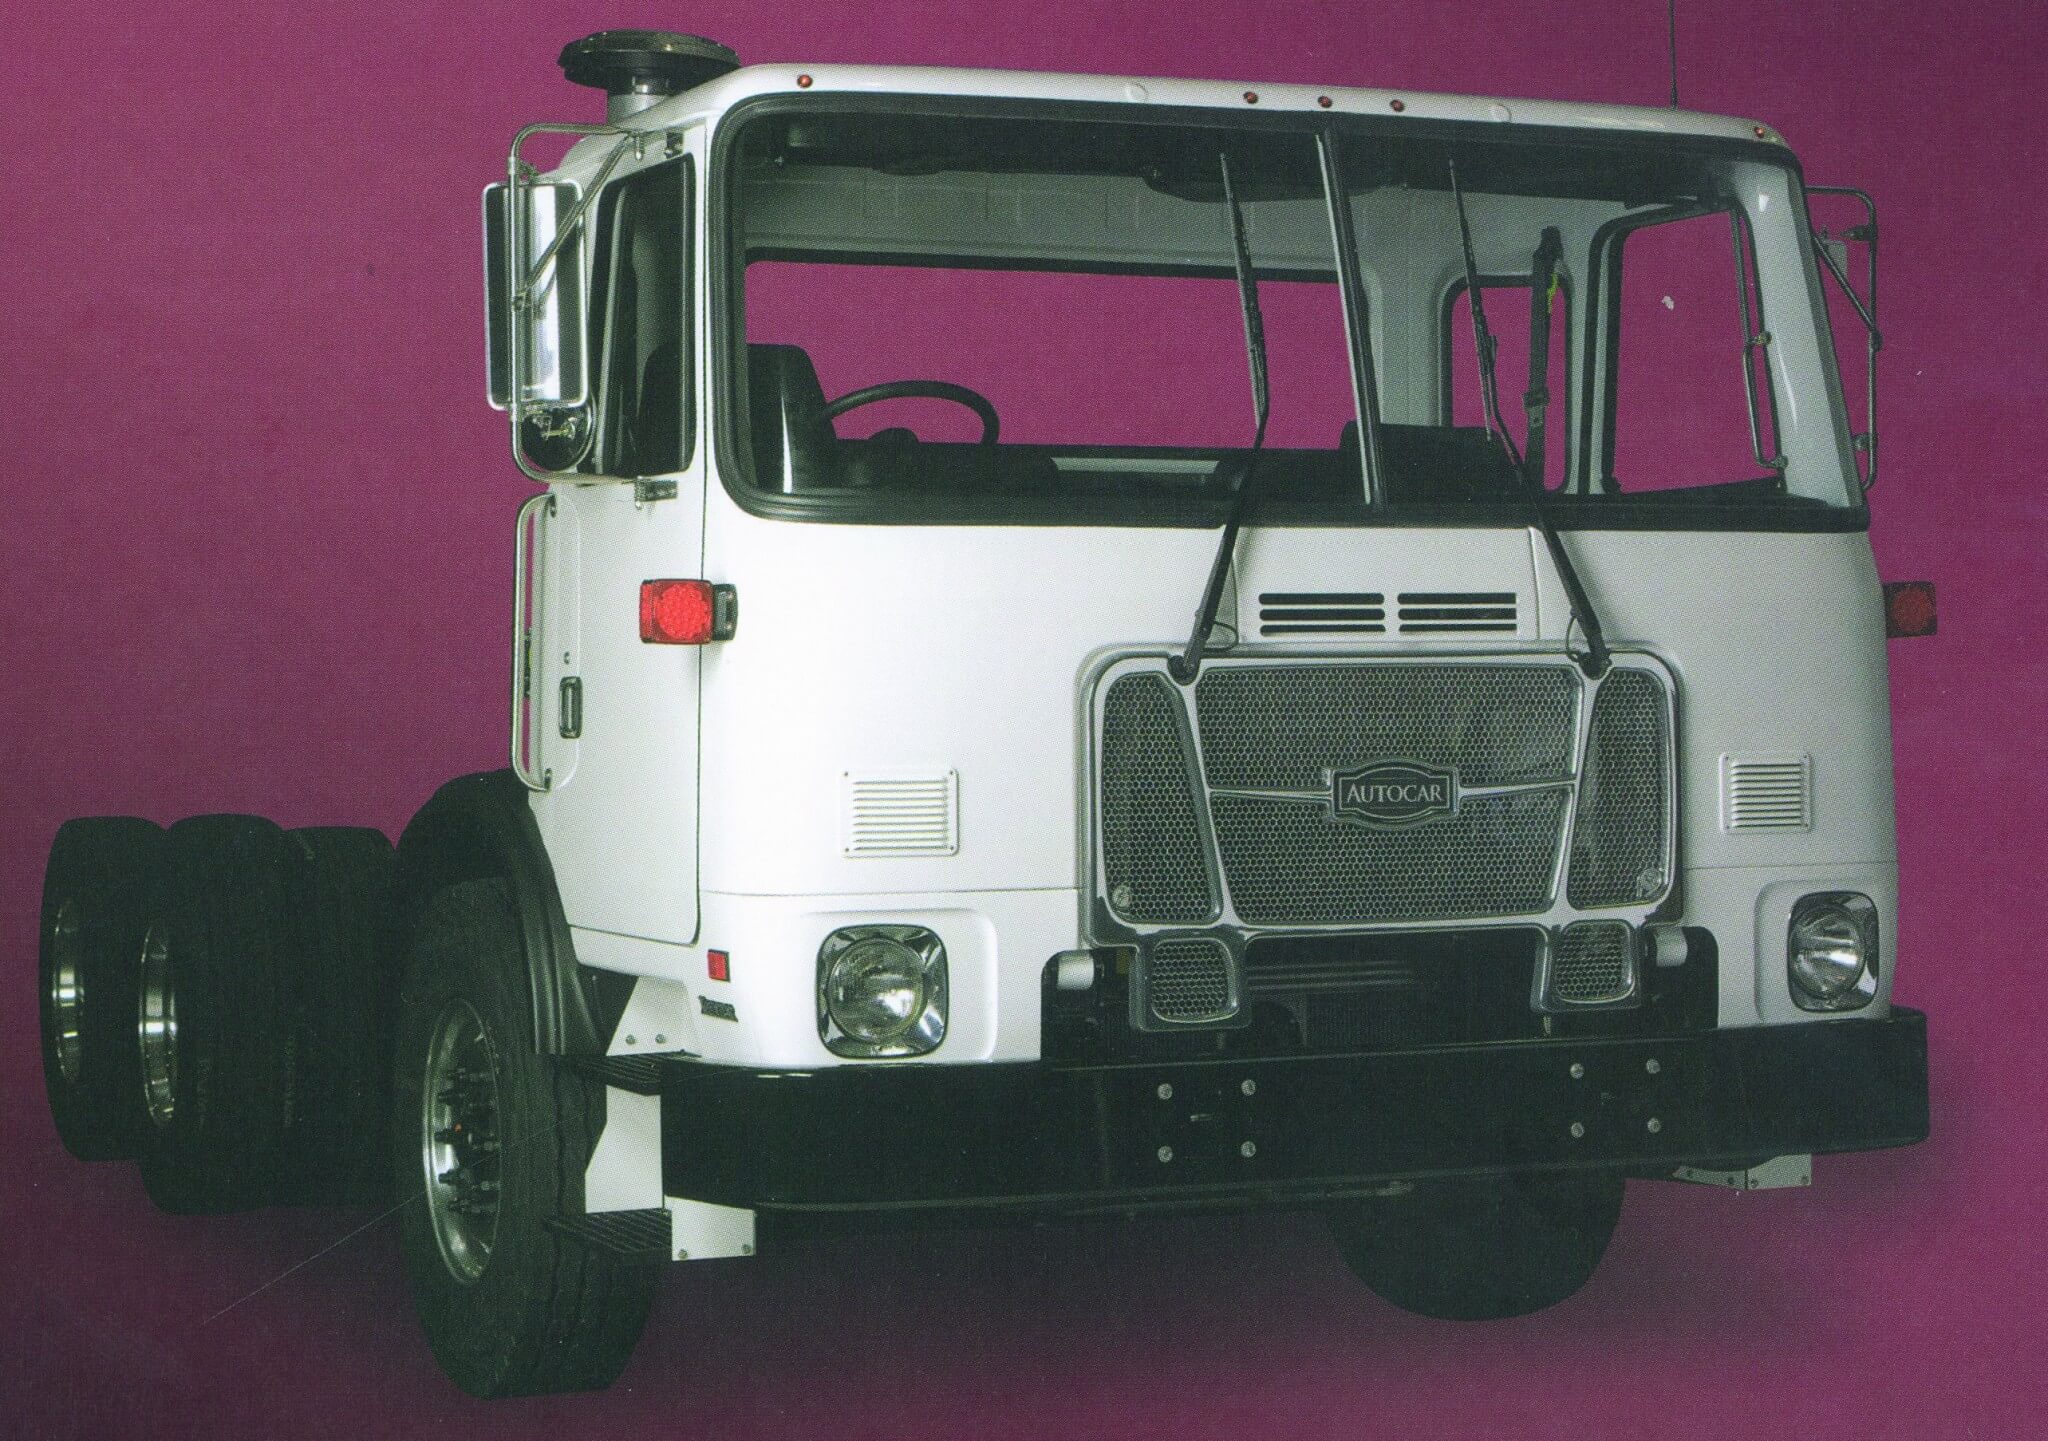 In 2001, Volvo sold the Autocar brand and the Xpeditor ACX chassis to Grand Vehicle Works Holdings LLC. 